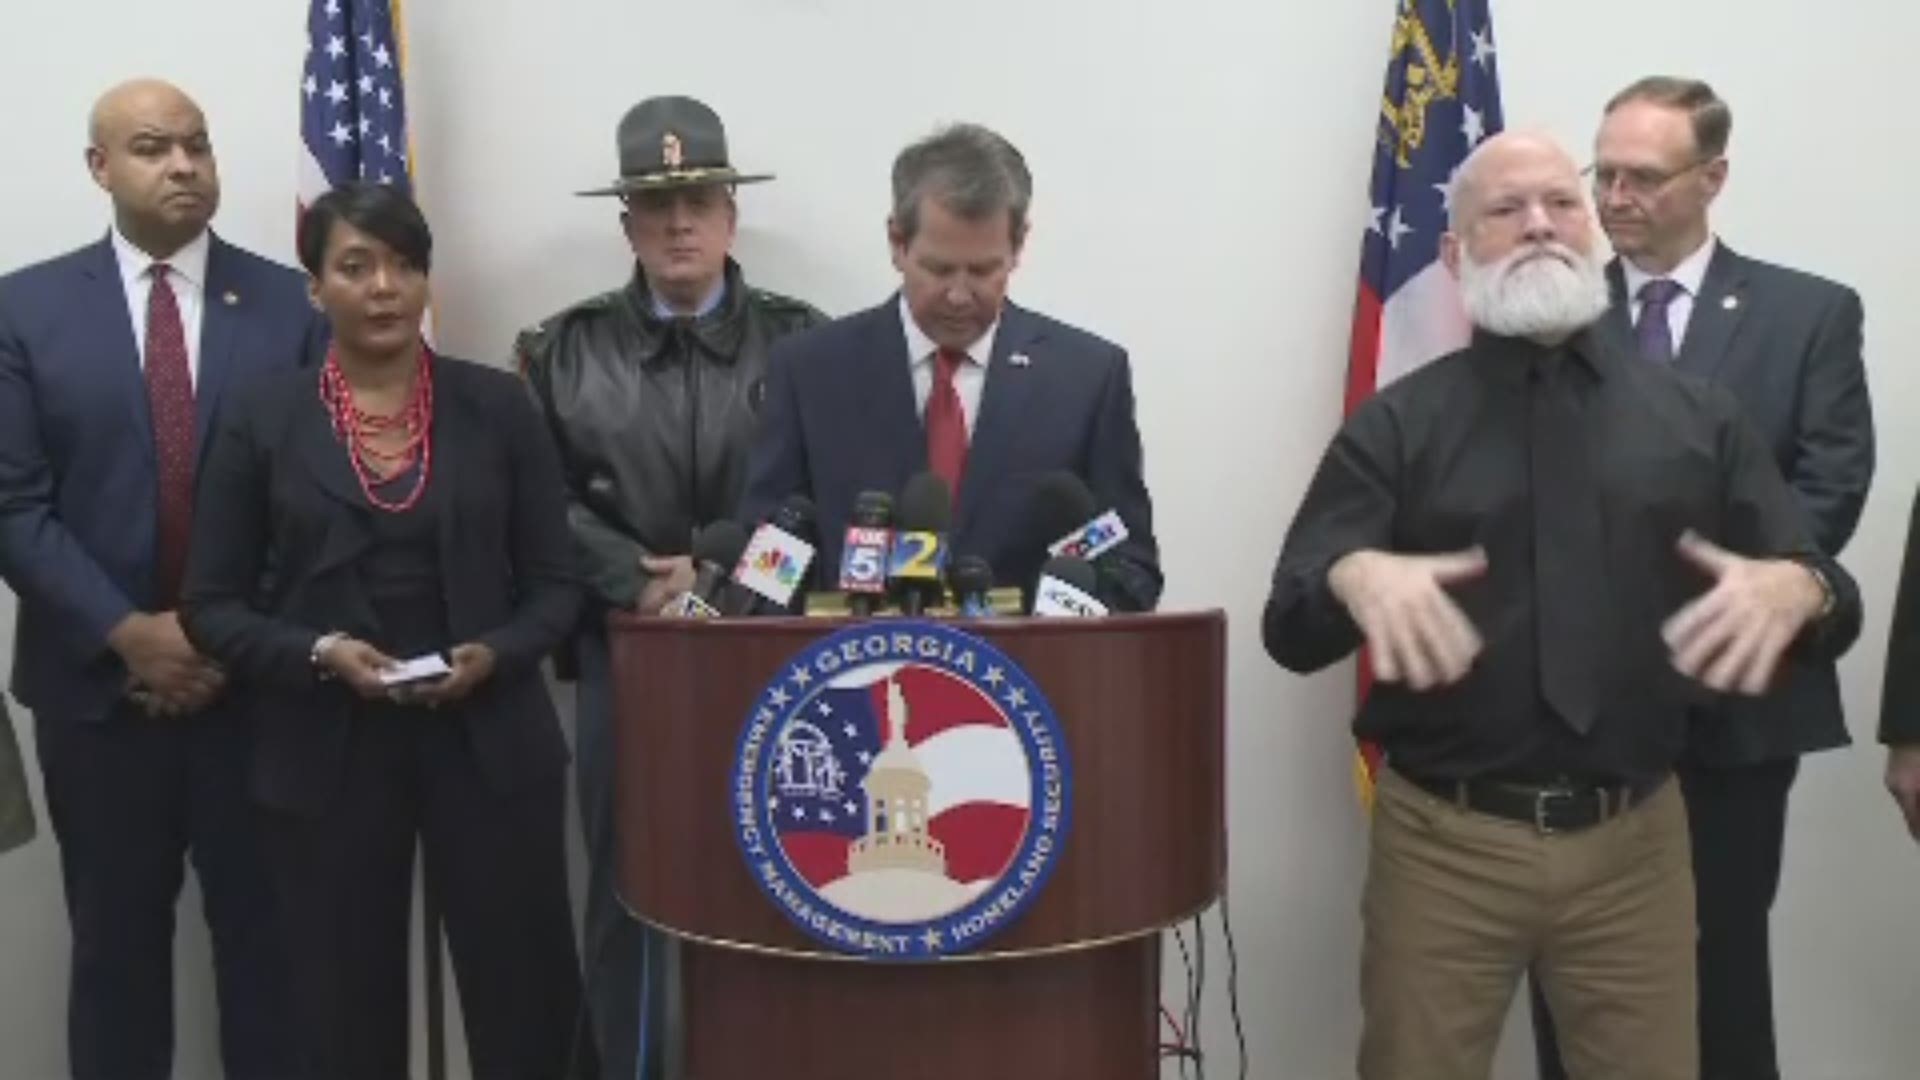 In a joint news conference Monday morning, Georgia Gov. Brian Kemp and Atlanta Mayor Keisha Lance Bottoms announced Tuesday closings of city offices as well as state offices in 35 counties directly affected by the pending winter weather.